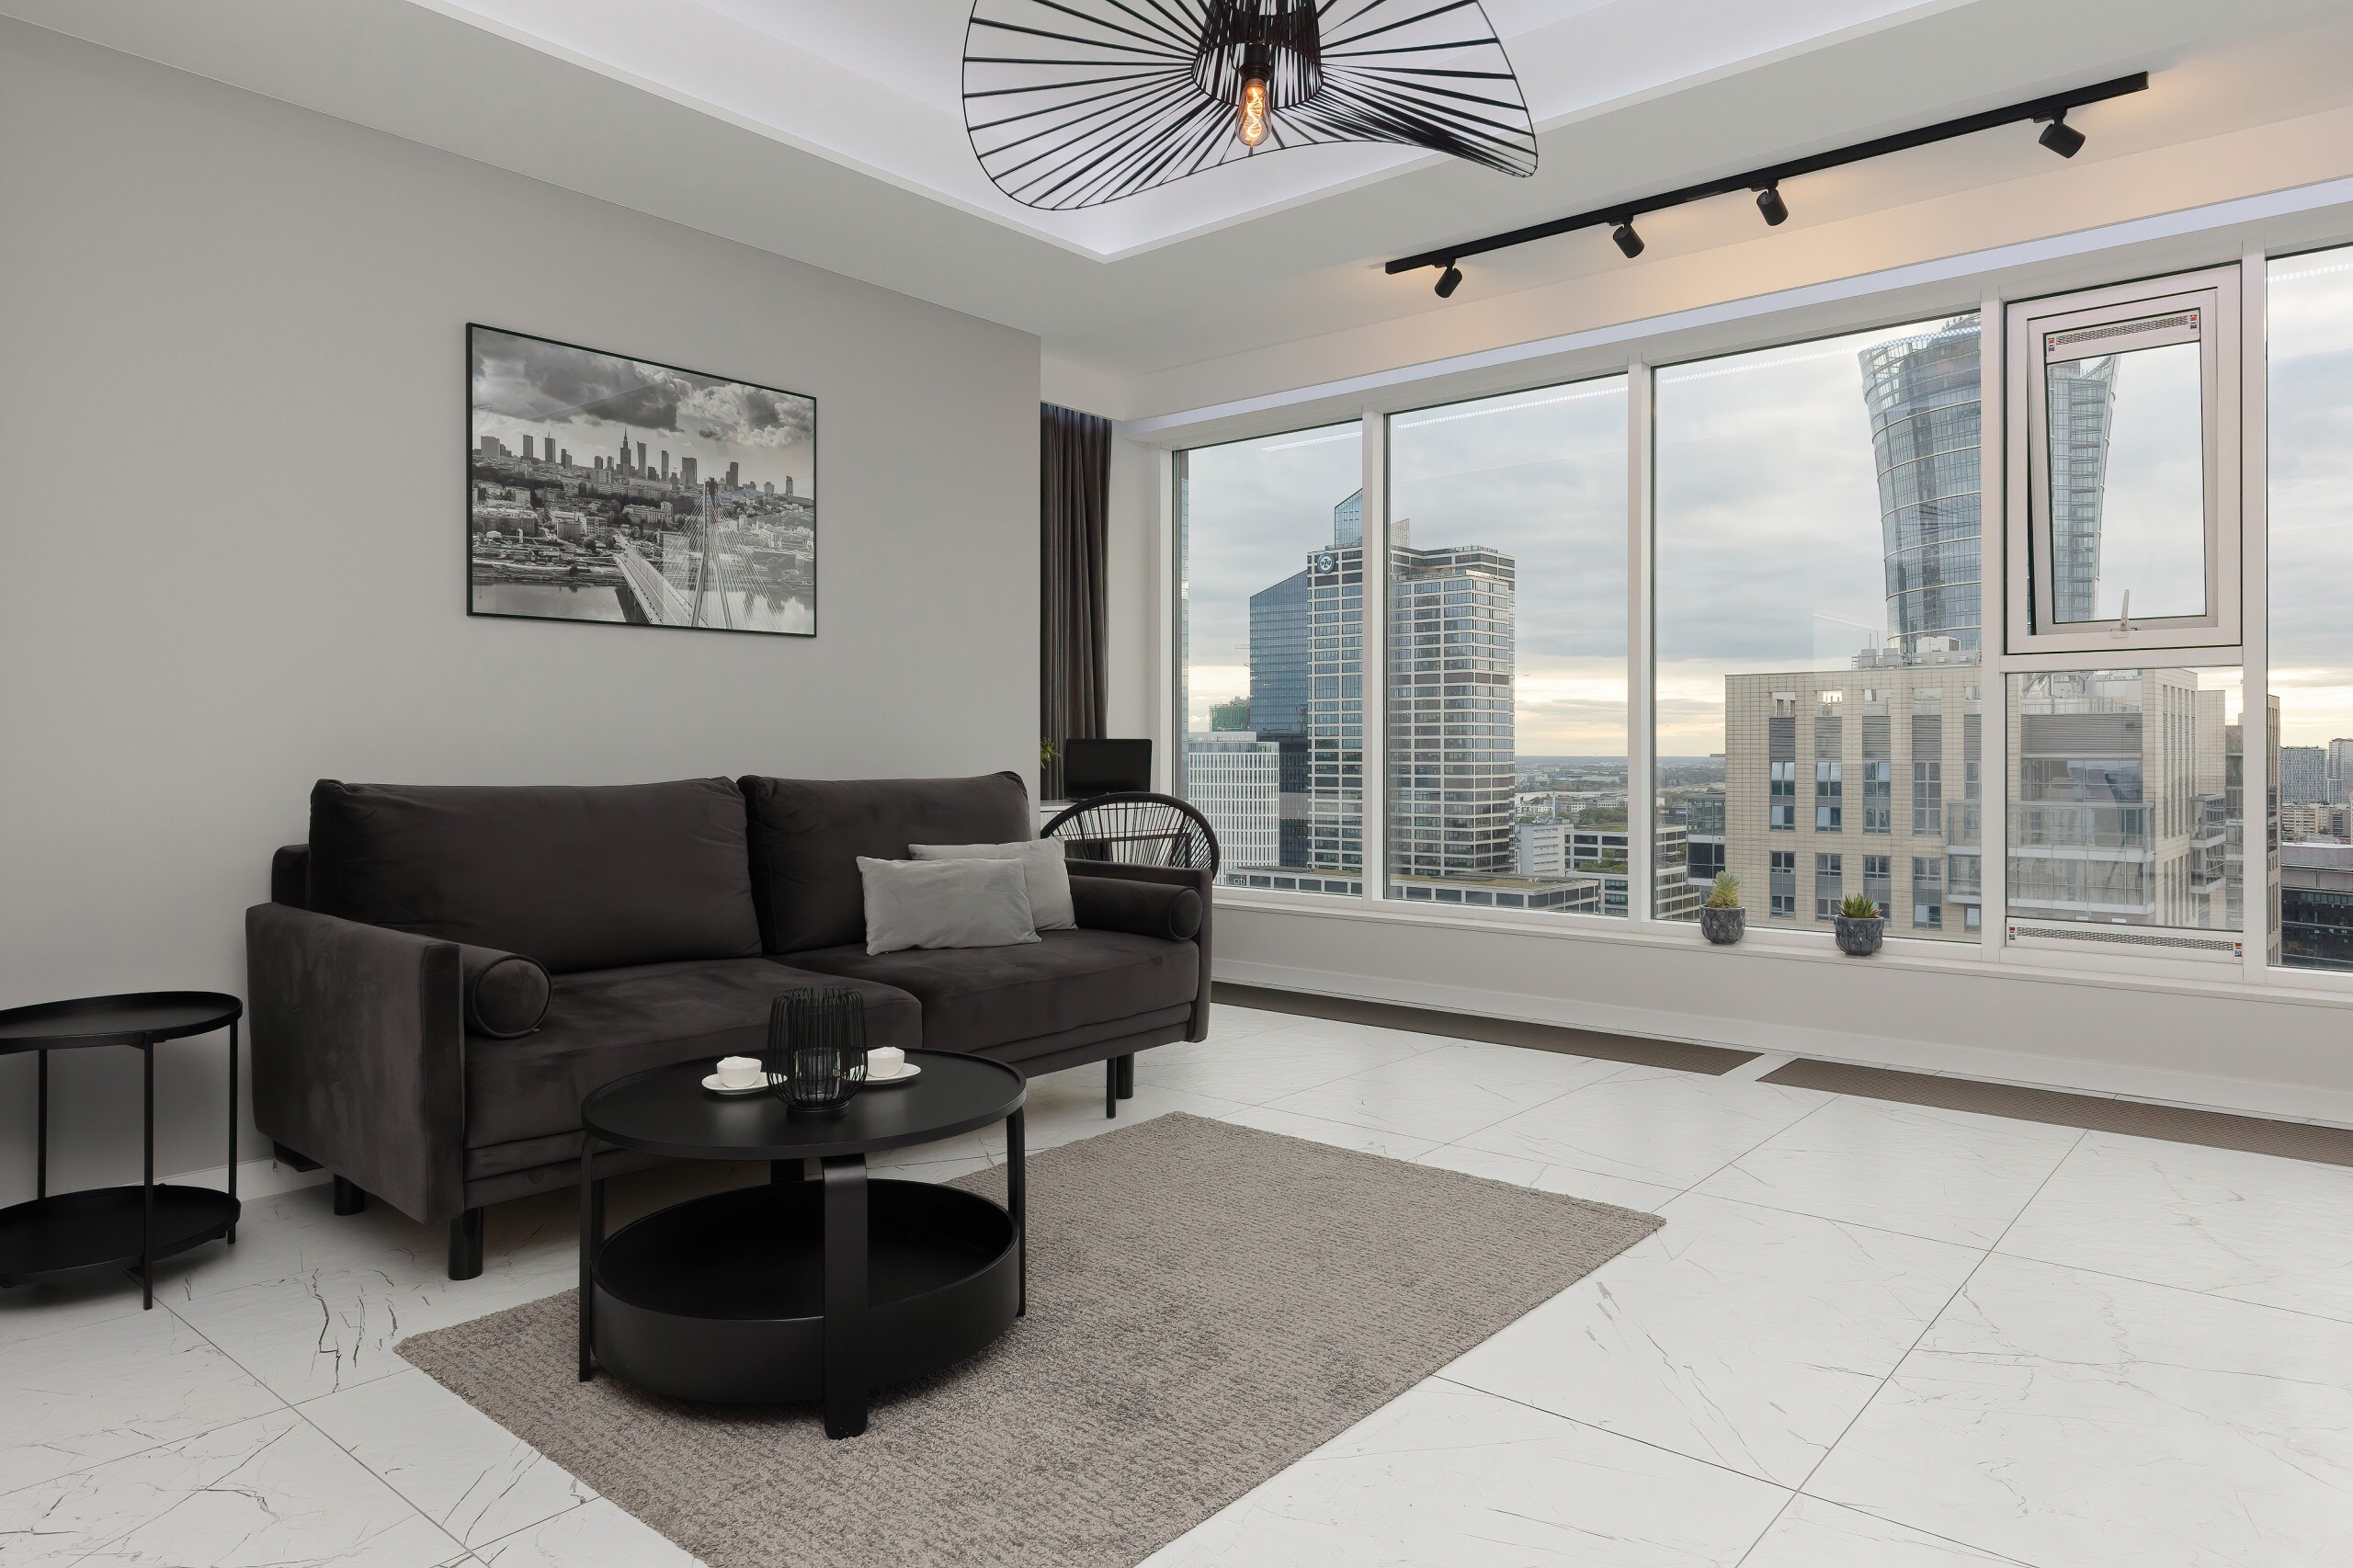 Property Image 1 - Spacious & High Standard Business Apartment Overlooking the City Skyline